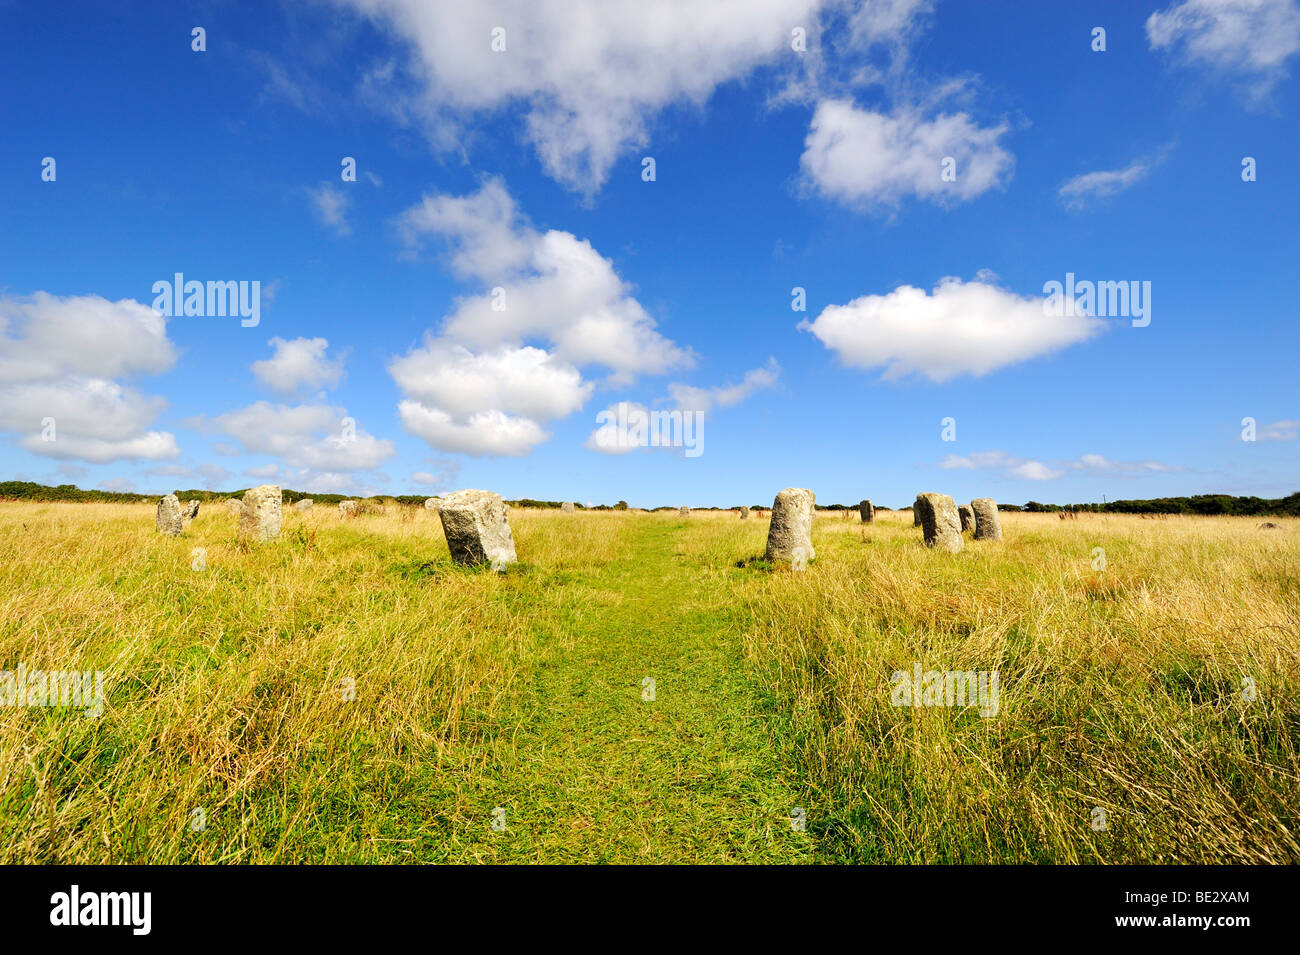 Merry Maidens, stone circle of 19 megaliths from the Bronze Age, in Penzance, Cornwall, England, UK, Europe Stock Photo